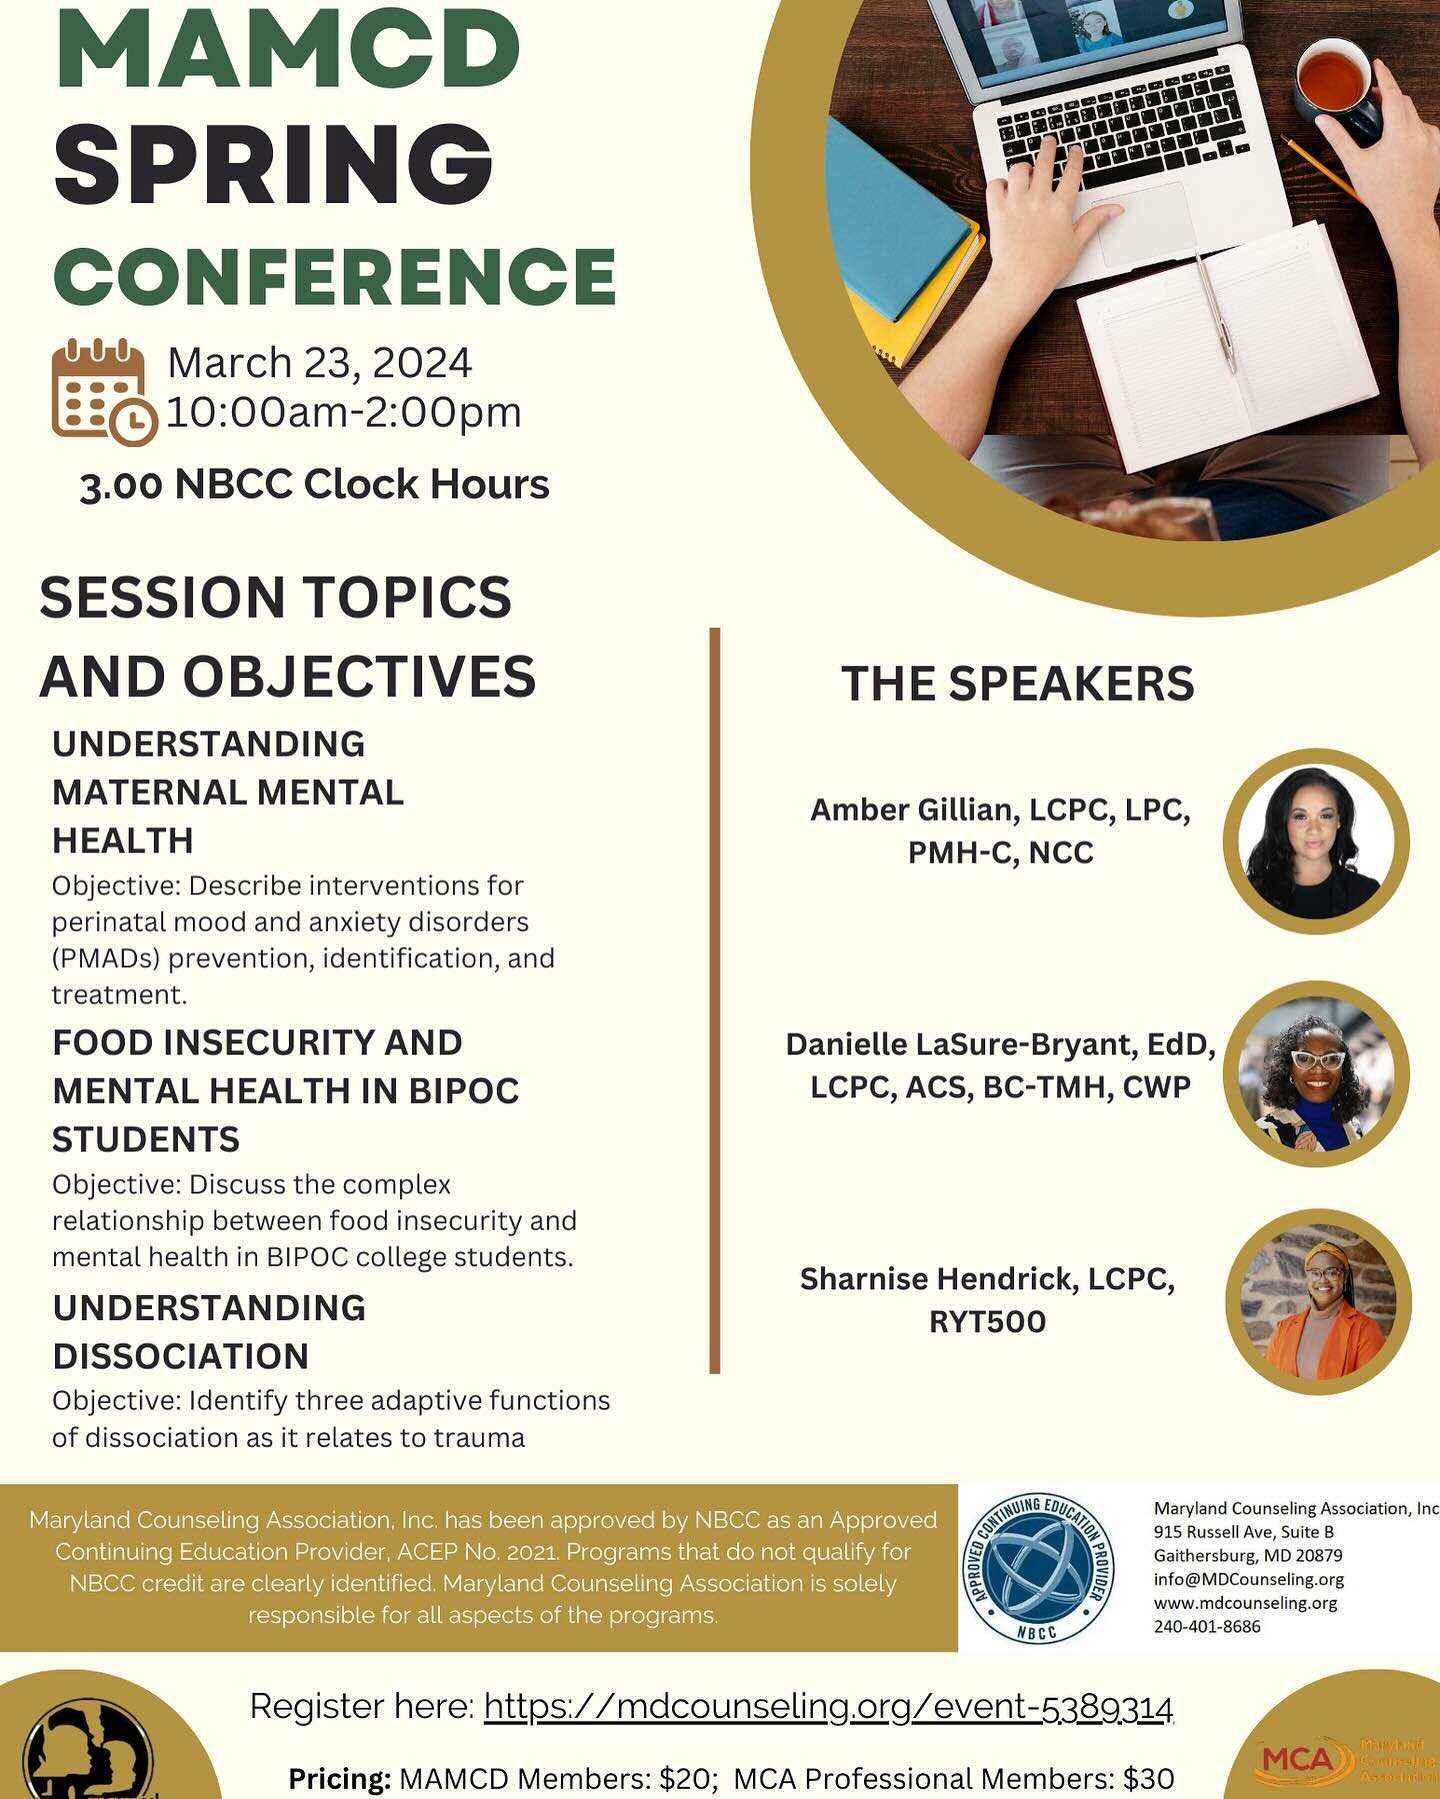 Excited to join @marylandamcd for their spring conference to speak about the foundations of understanding and working with dissociation! Head to https://mdcounseling.org/event-5389314 or their page to register. The event is from 10am-2pm EST and I&rs